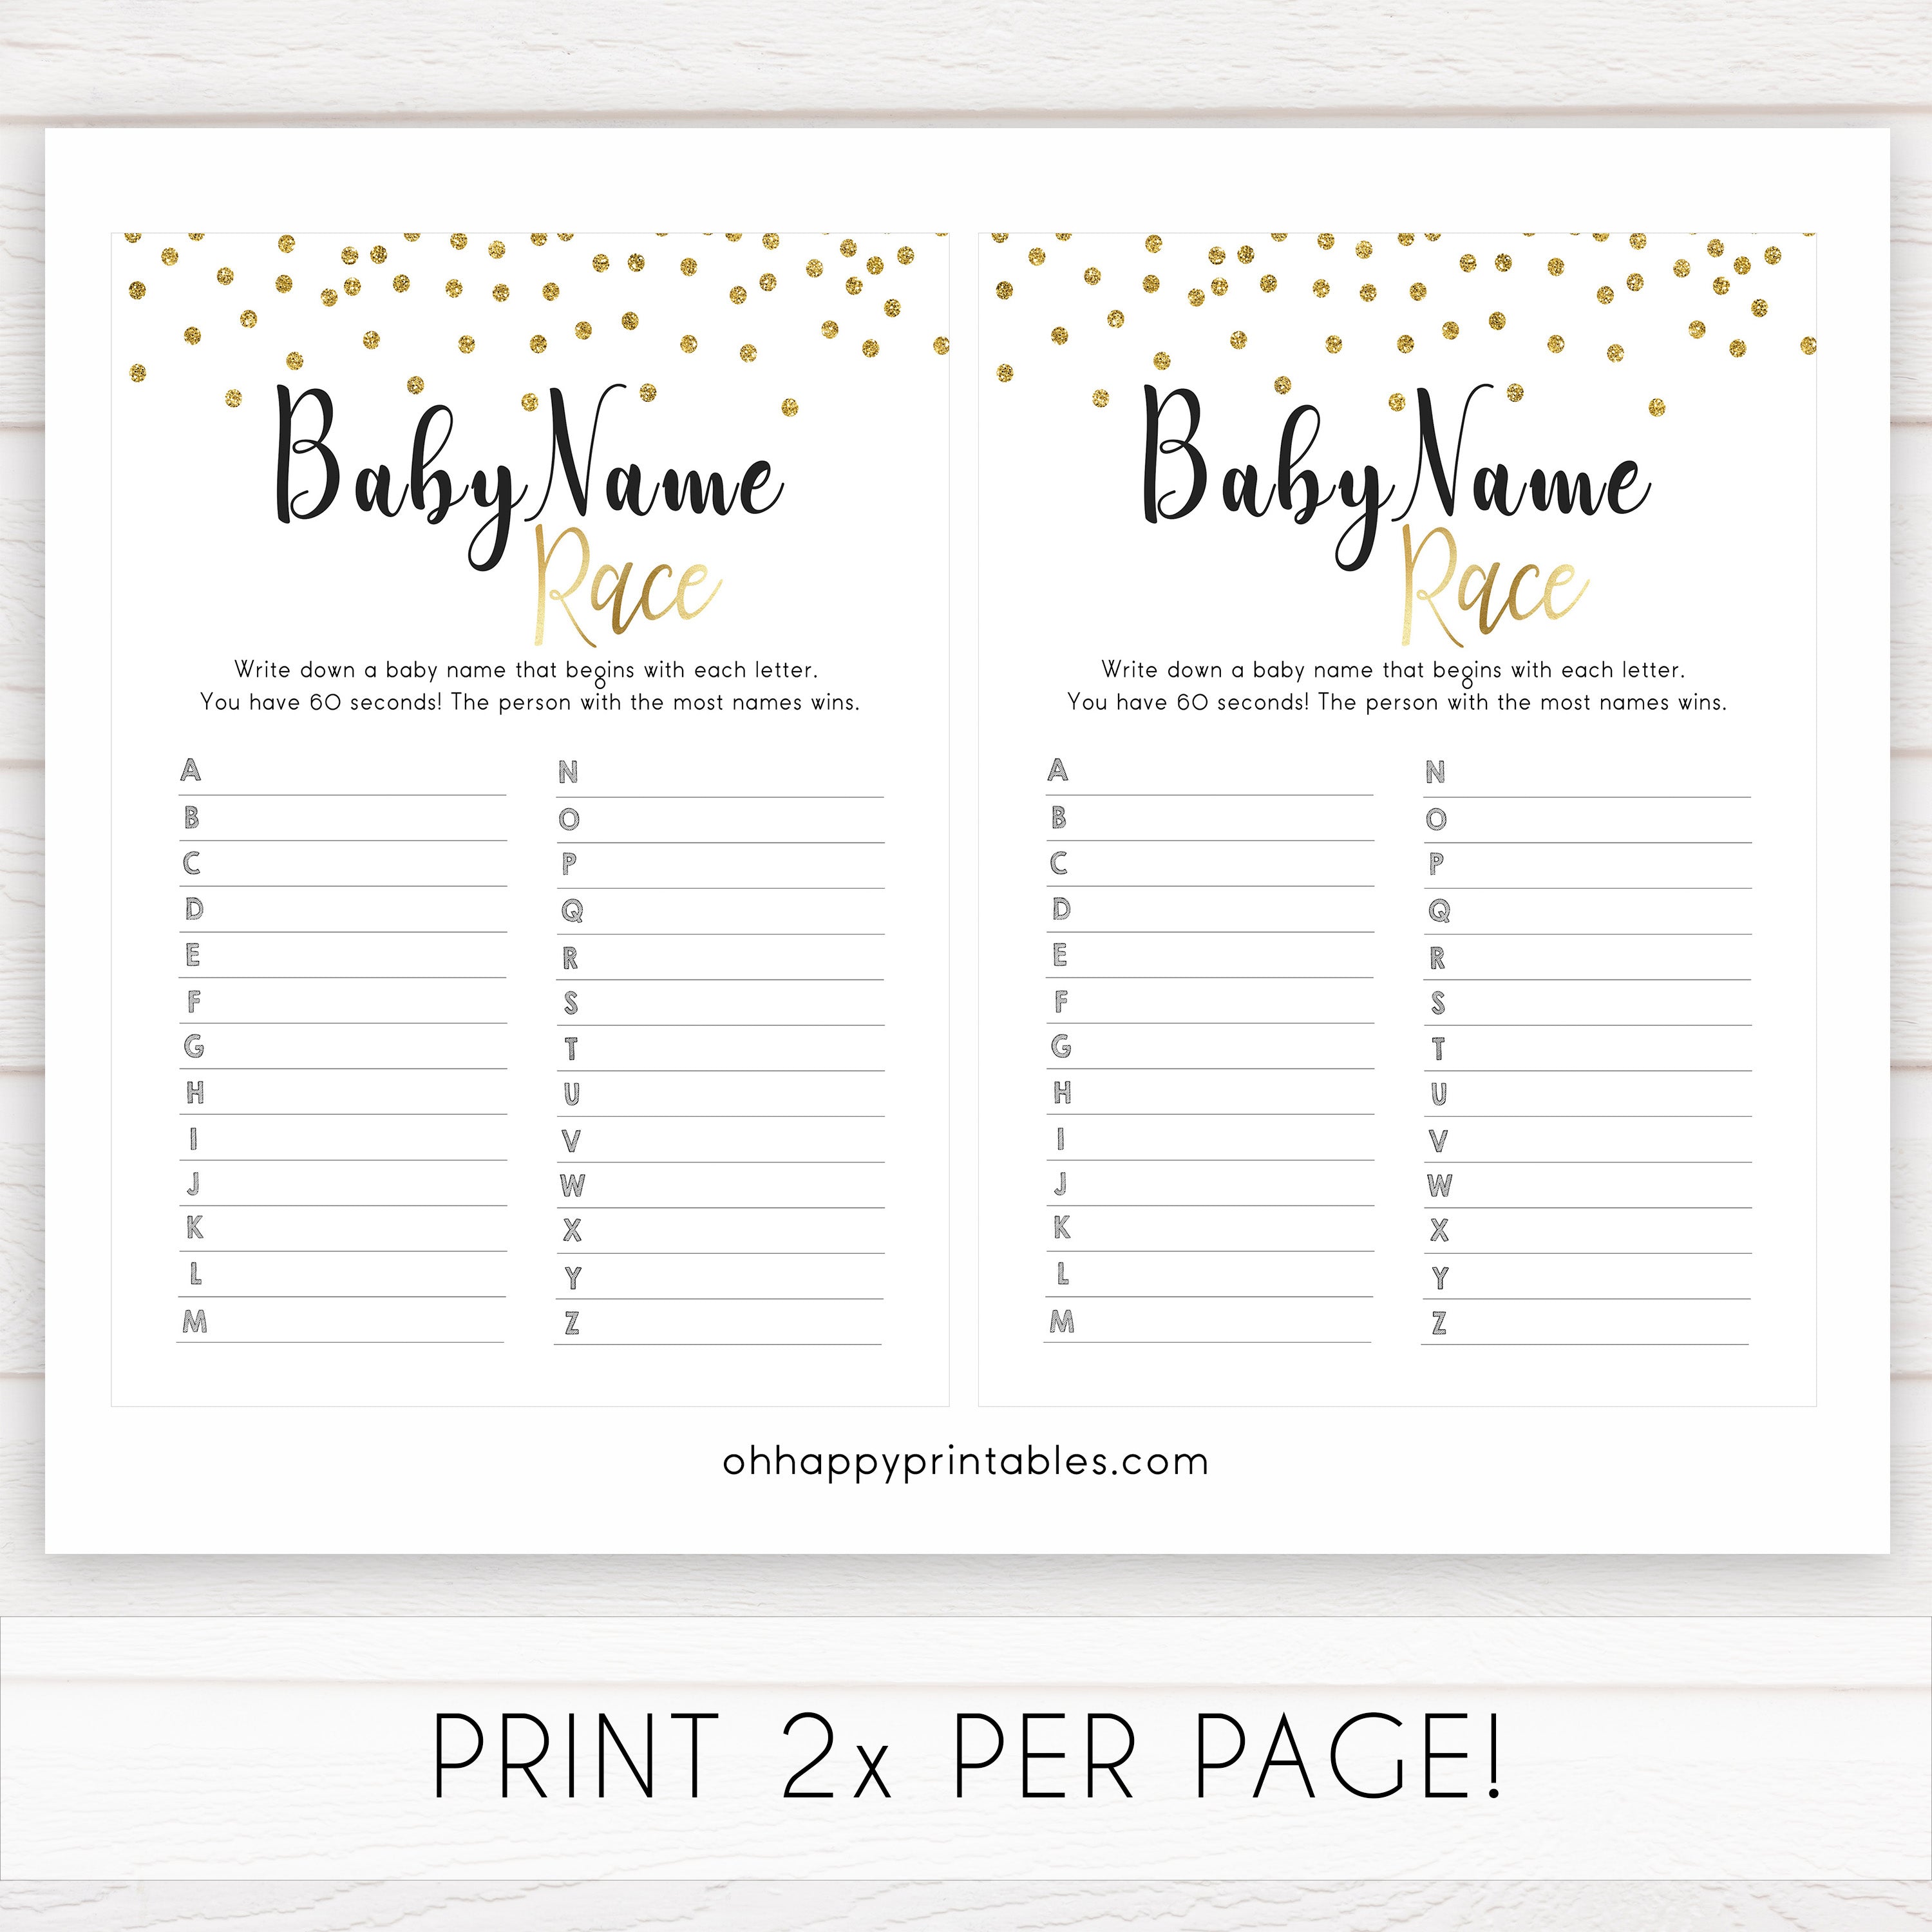 gold baby shower games, baby name race games, printable baby games, fun baby games, popular baby games, baby shower games, gold baby games, print baby games, gold baby shower